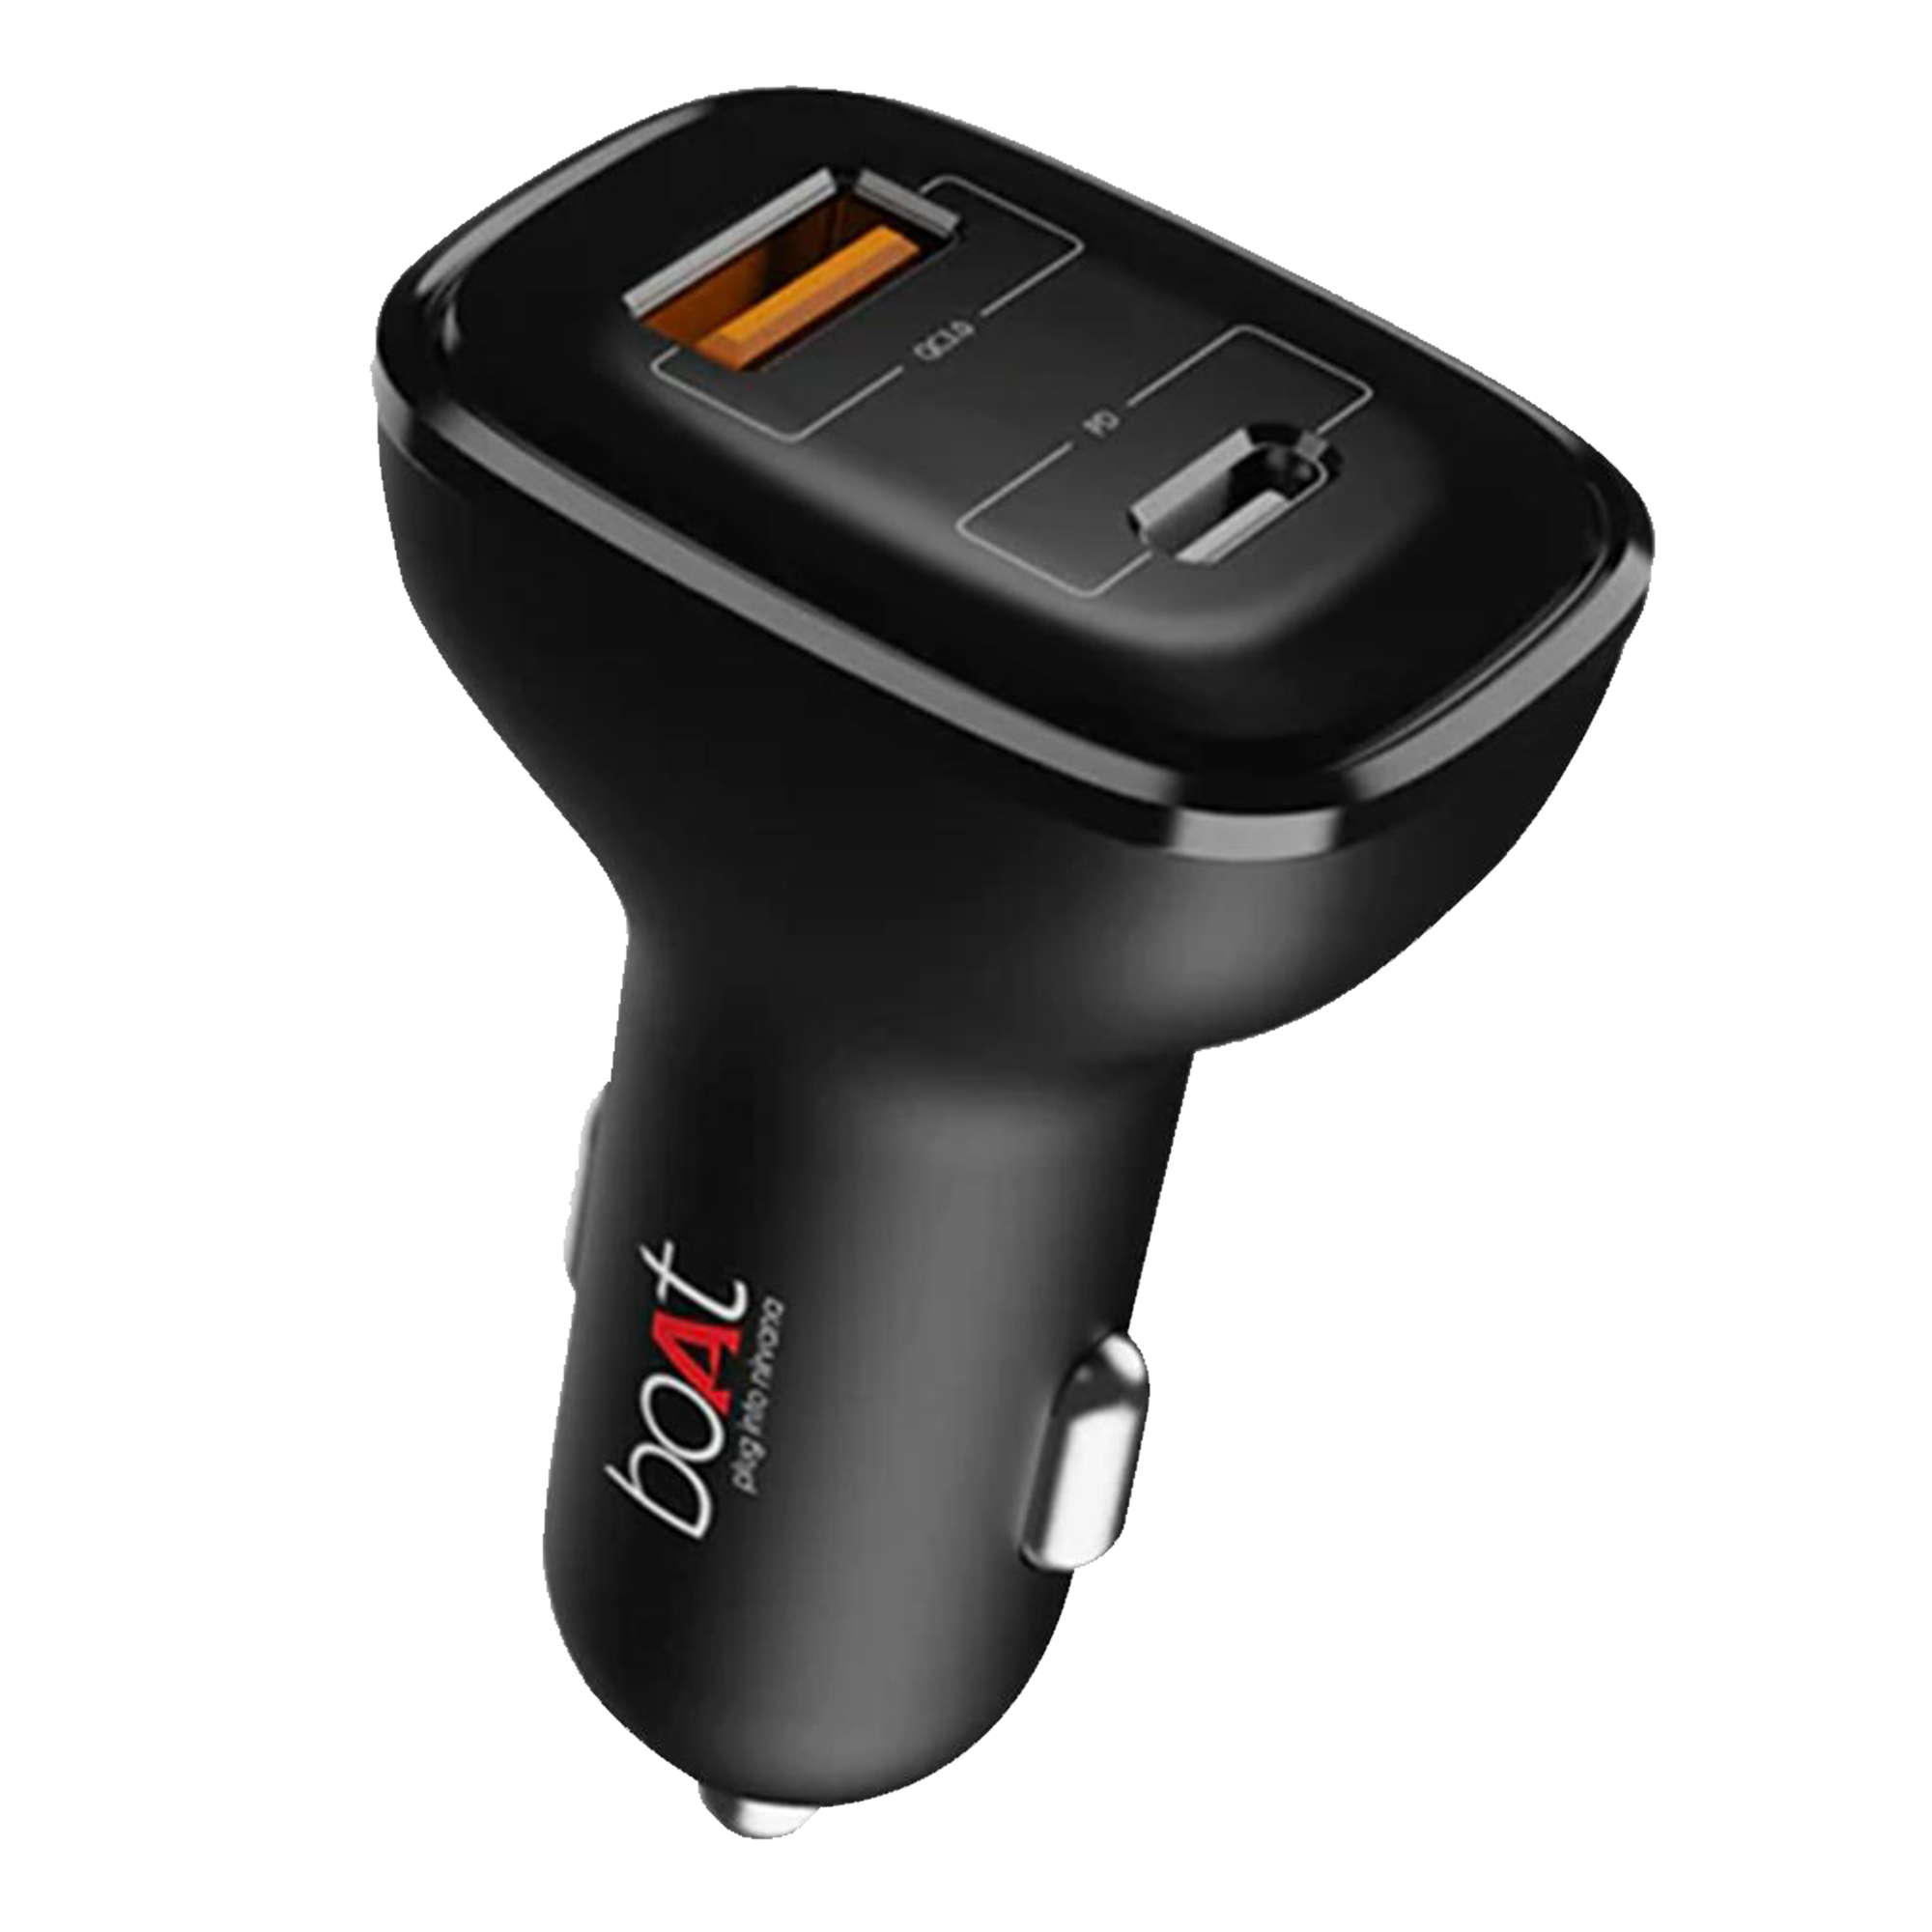 boAt 15 W Qualcomm 3.0 Turbo Car Charger Price in India - Buy boAt 15 W  Qualcomm 3.0 Turbo Car Charger Online at